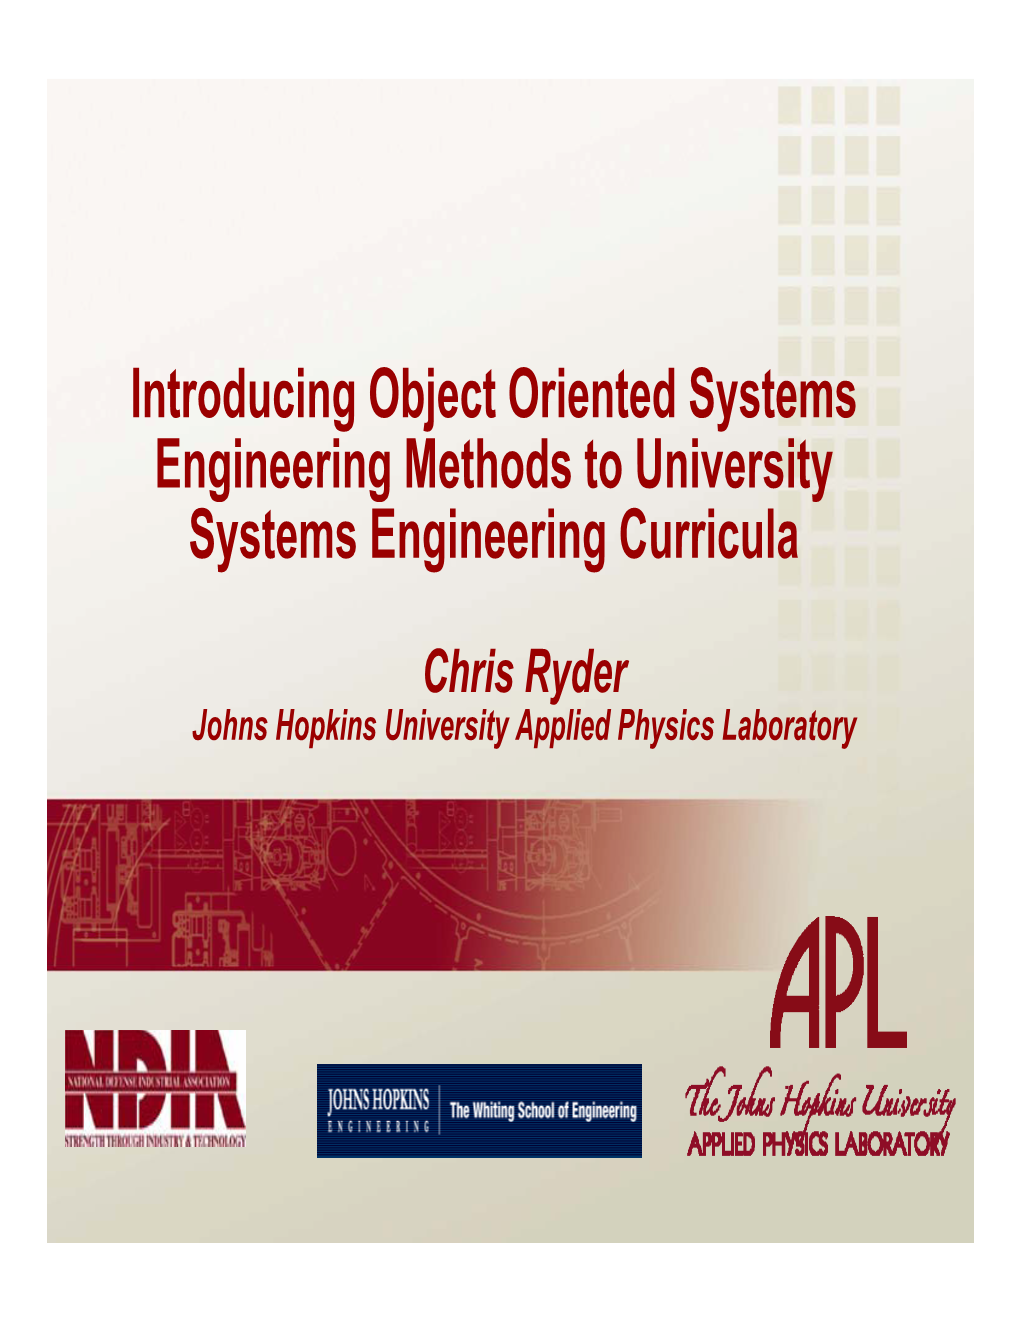 Introducing Object Oriented Systems Engineering Methods to University Systems Engineering Curricula